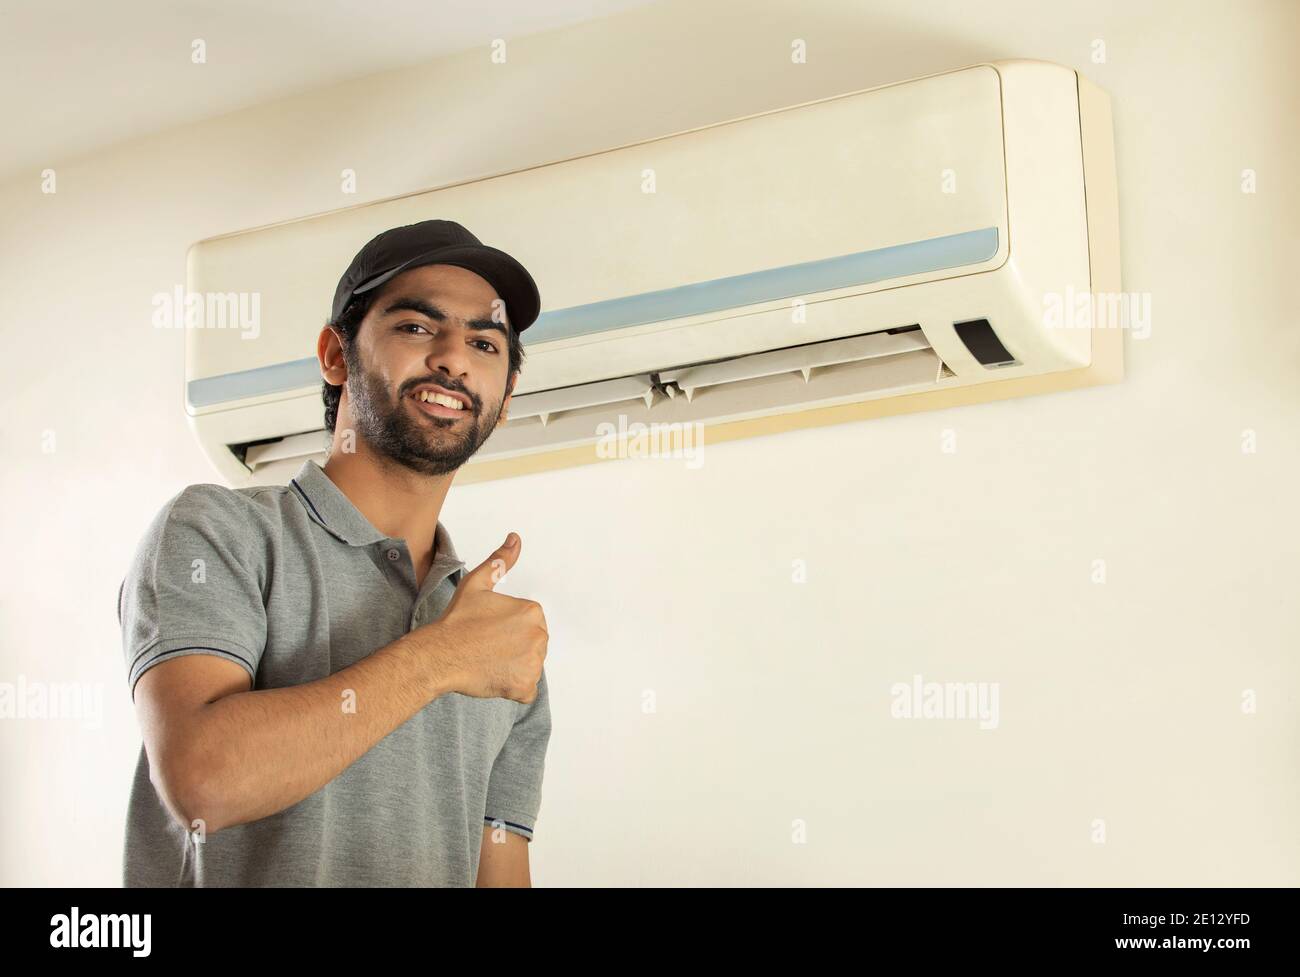 A YOUNG PROFESSIONAL HAPPILY SMILING AFTER REPAIRING AIR CONDITIONER Stock Photo